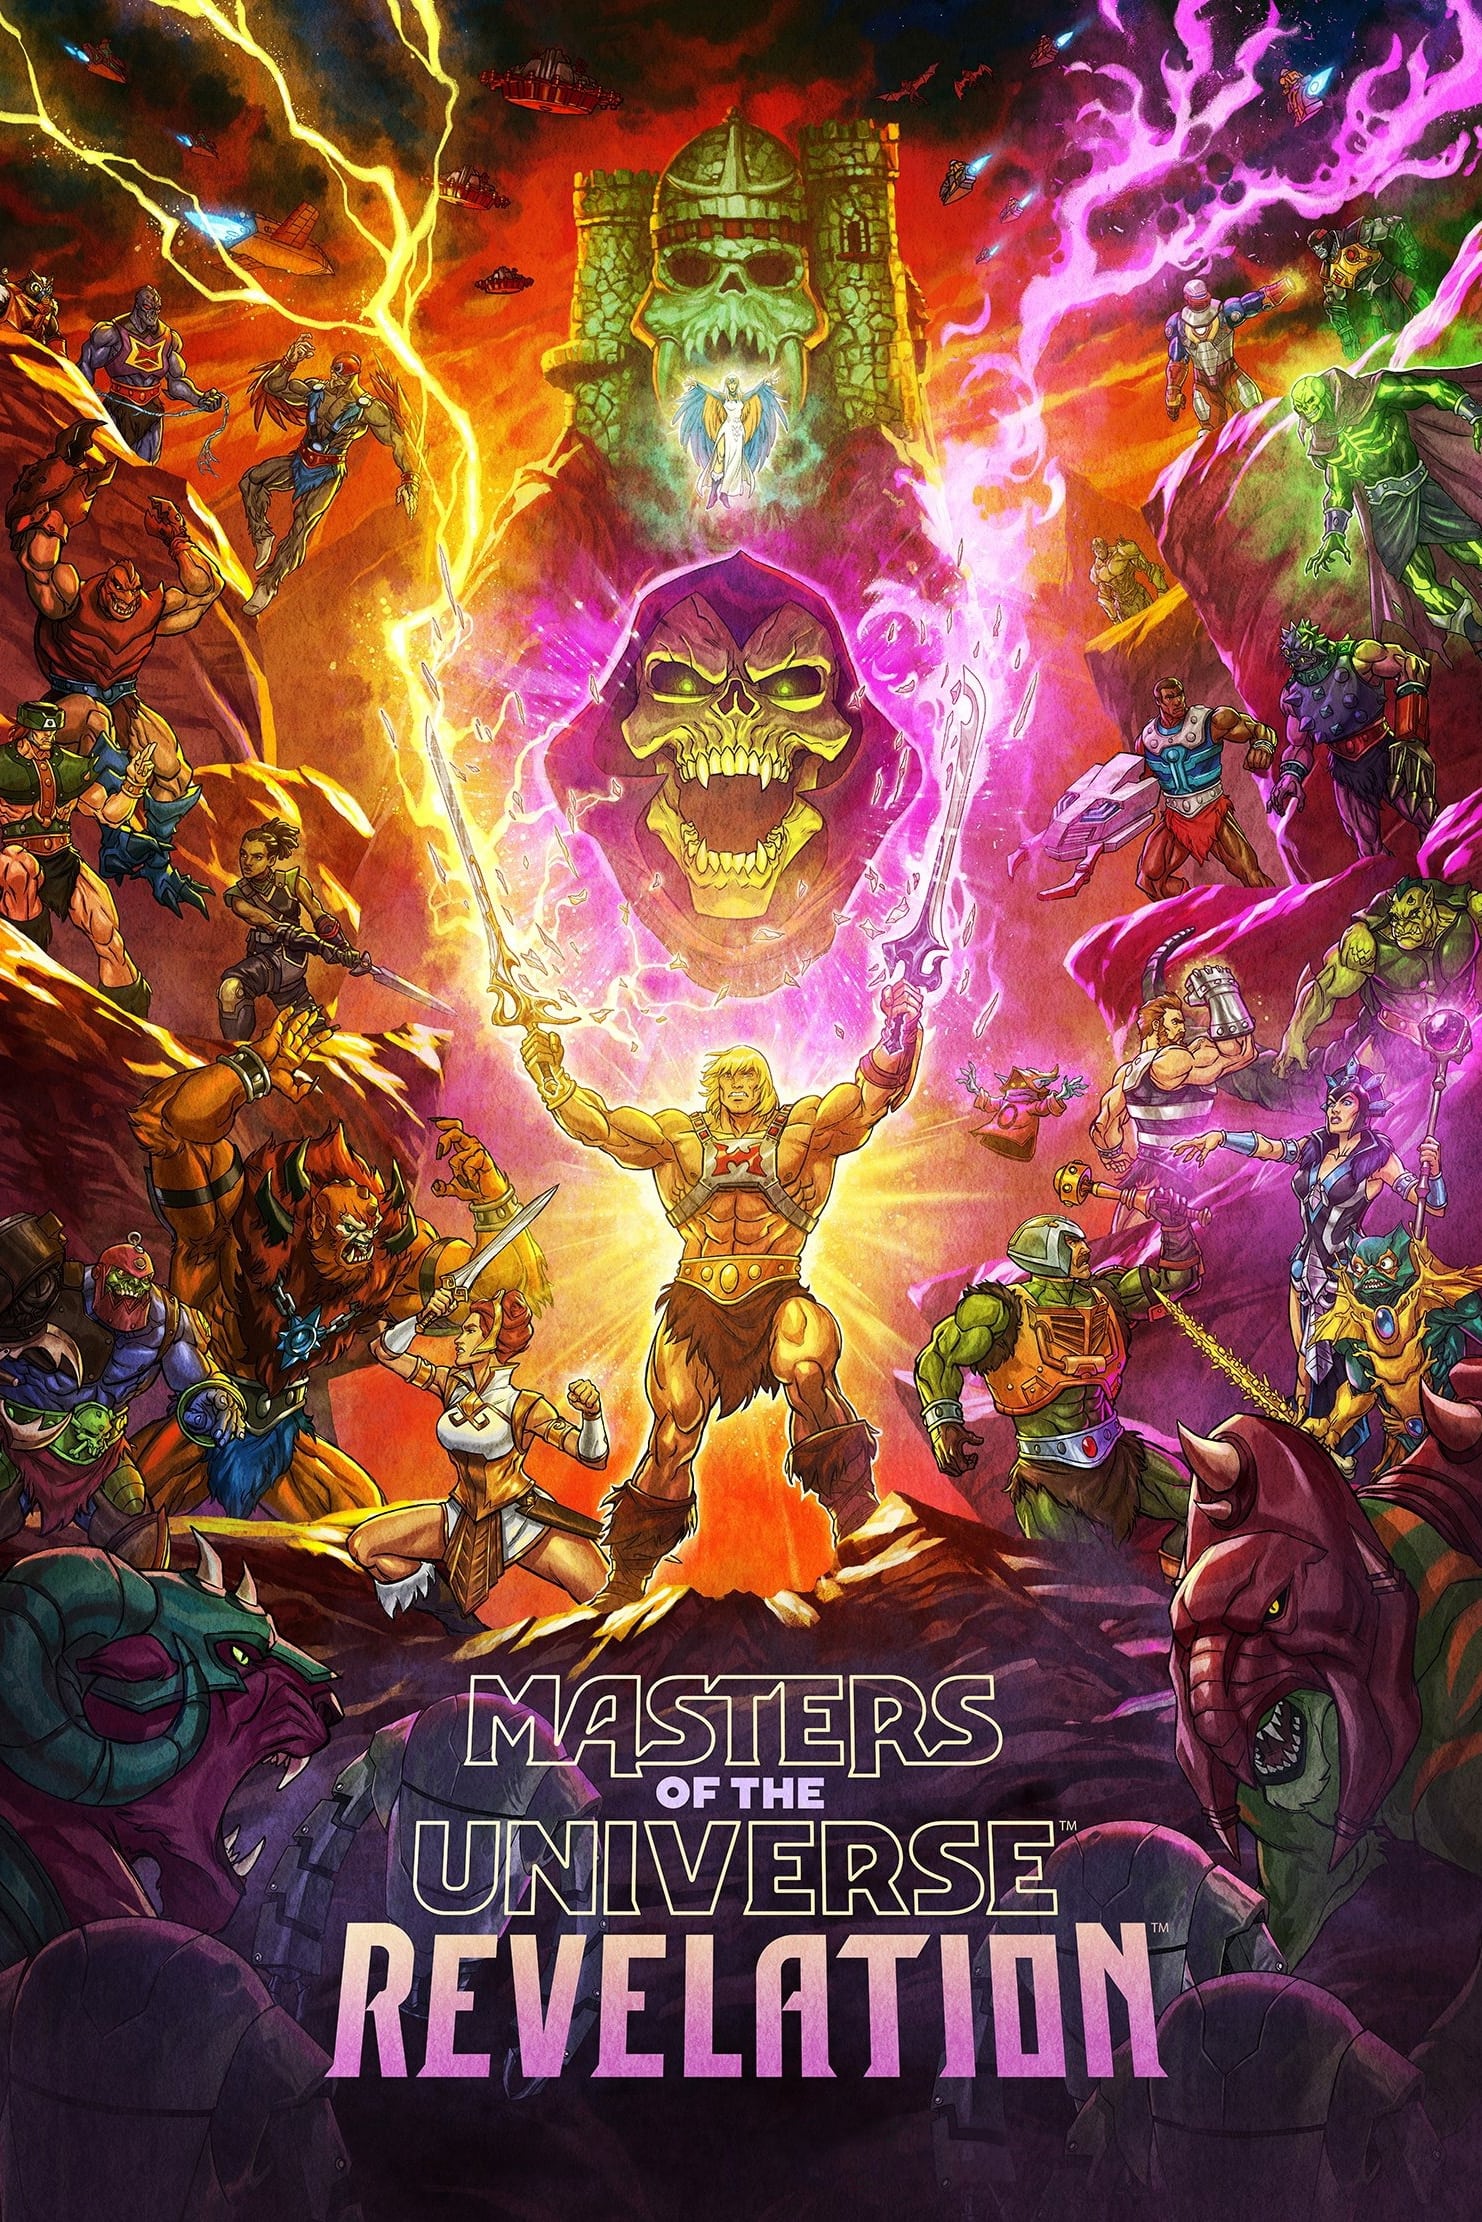 master of the universe pdf free download